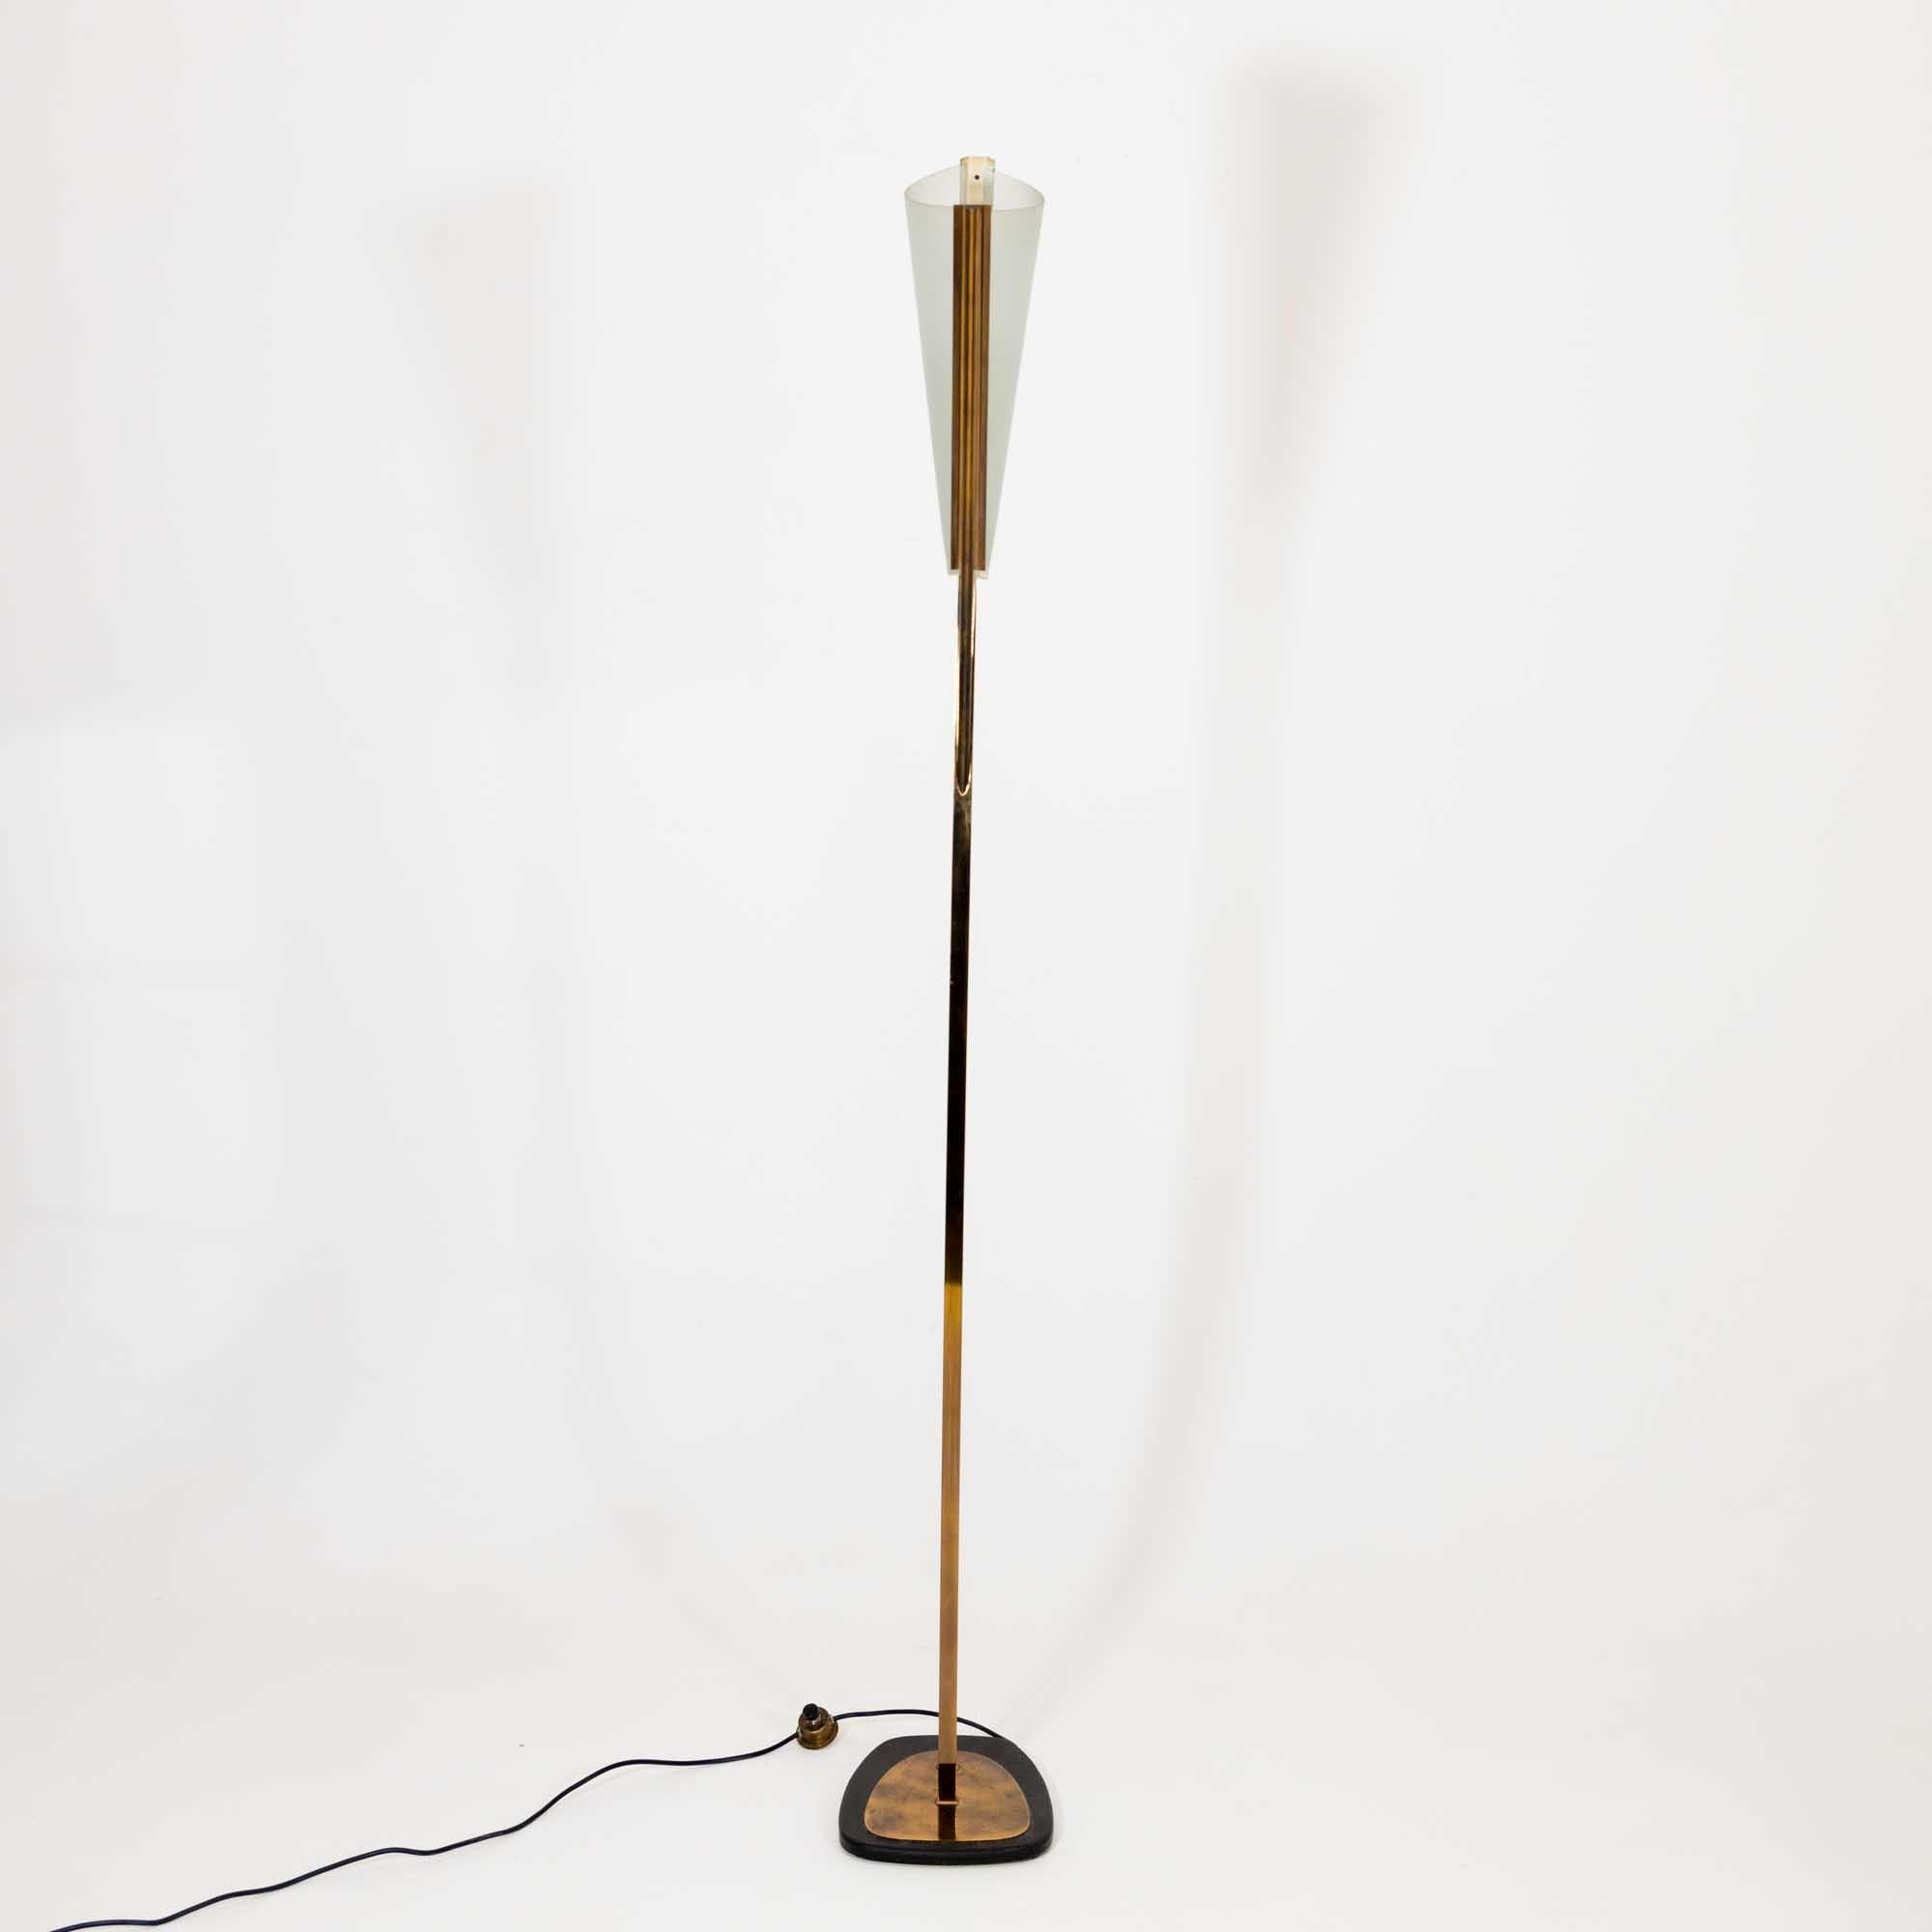 Single Italian Modernist Floor Lamp In Good Condition For Sale In New York, NY